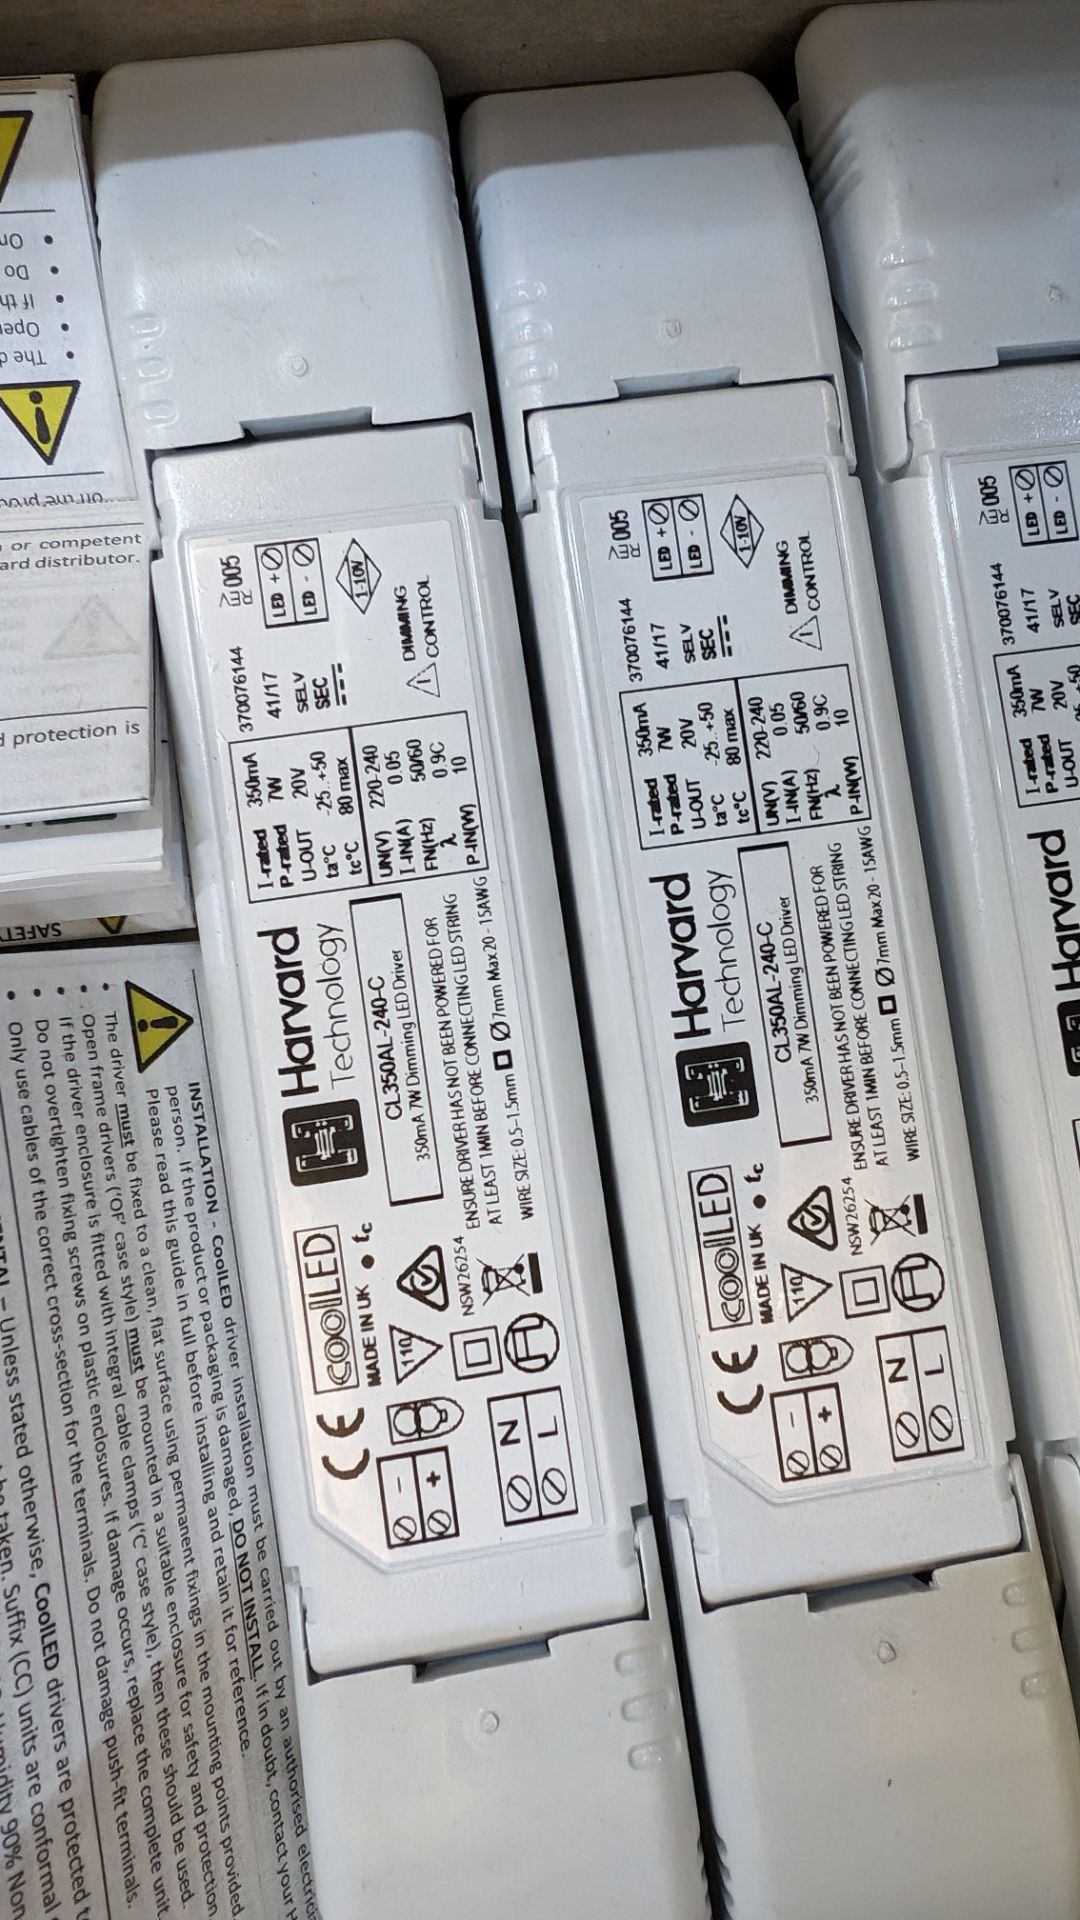 61 off Harvard 7w dimming LED drivers - Image 6 of 6